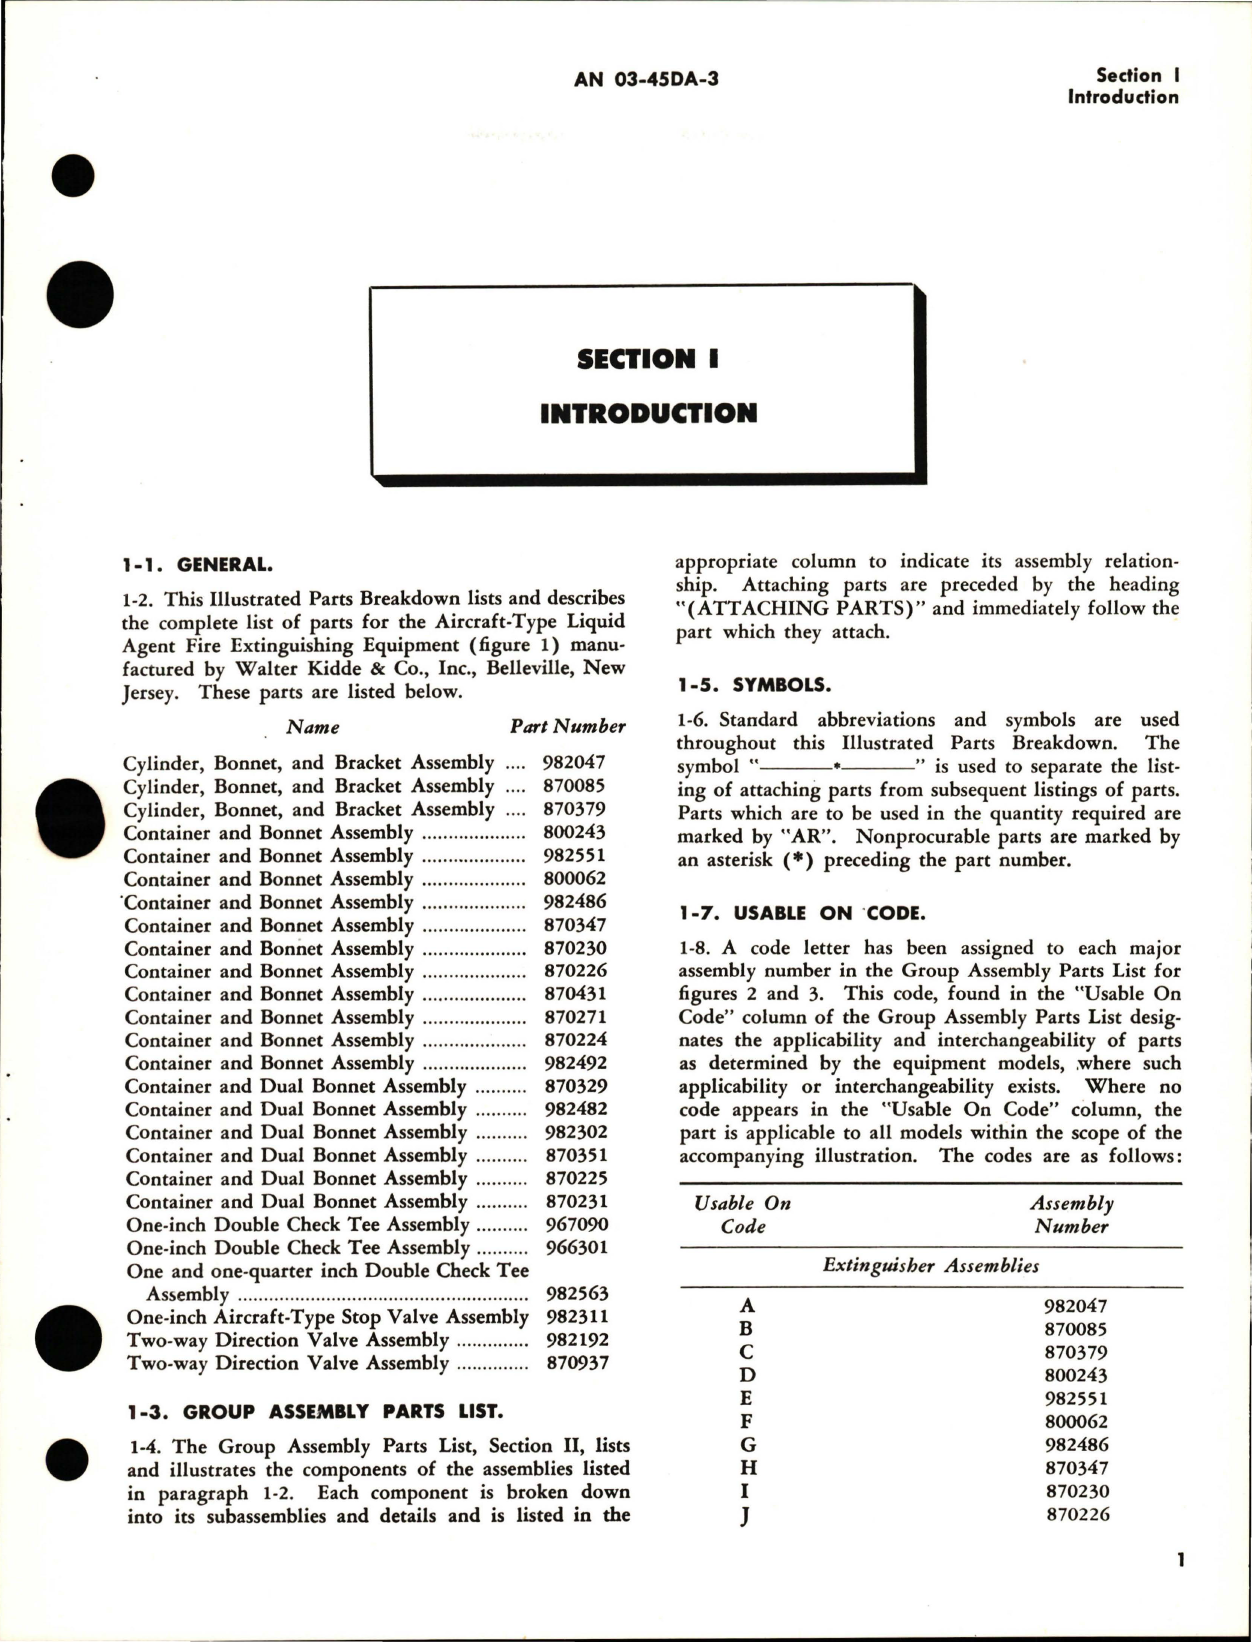 Sample page 5 from AirCorps Library document: Illustrated Parts Breakdown for Aircraft-Type Liquid Agent Fire Extinguishing Equipment 